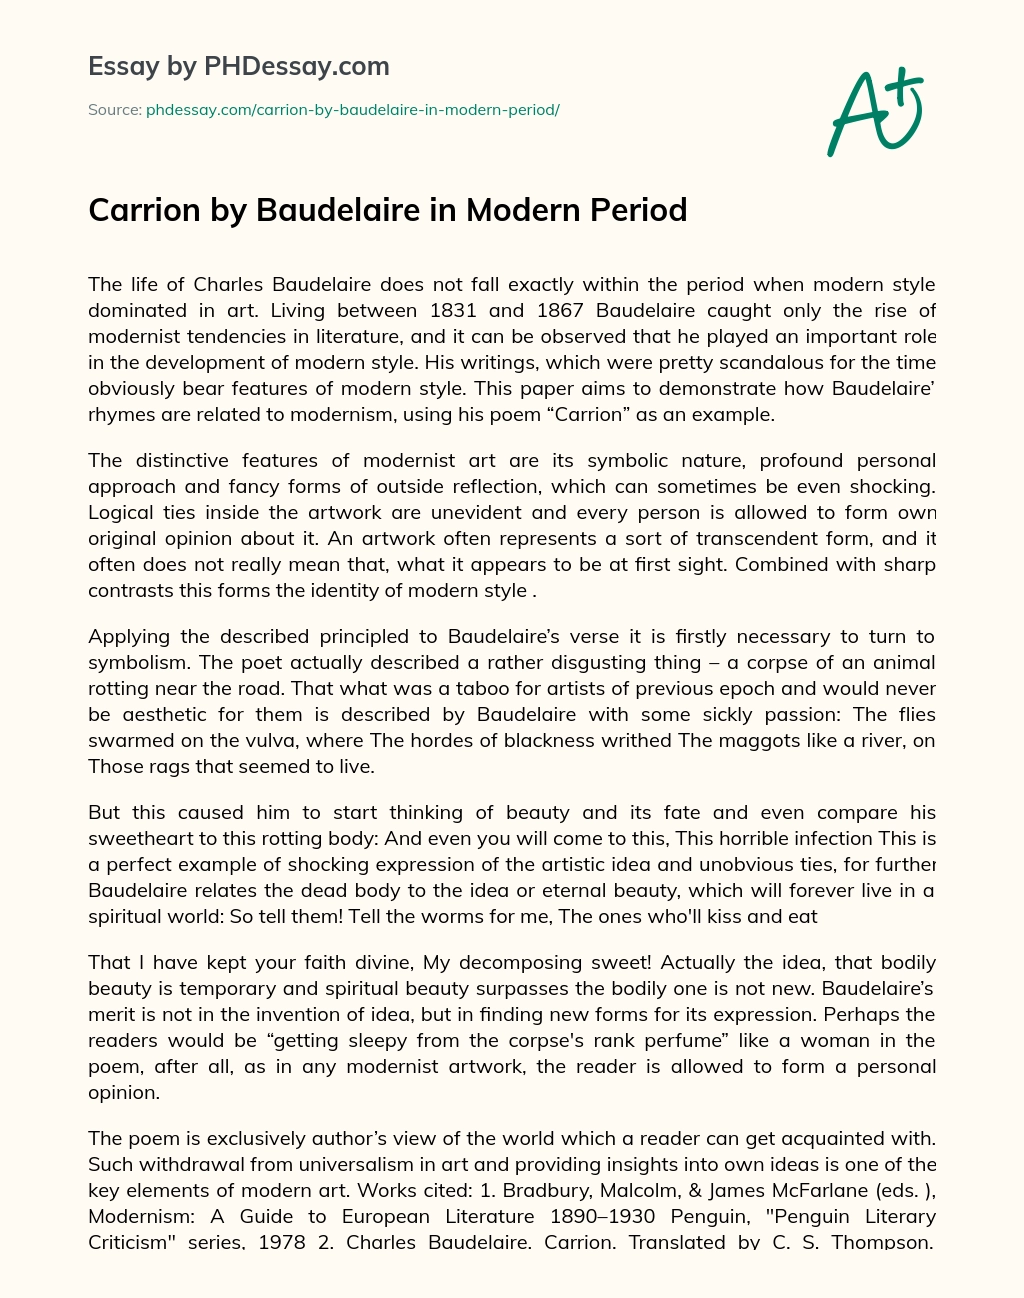 Carrion by Baudelaire in Modern Period essay